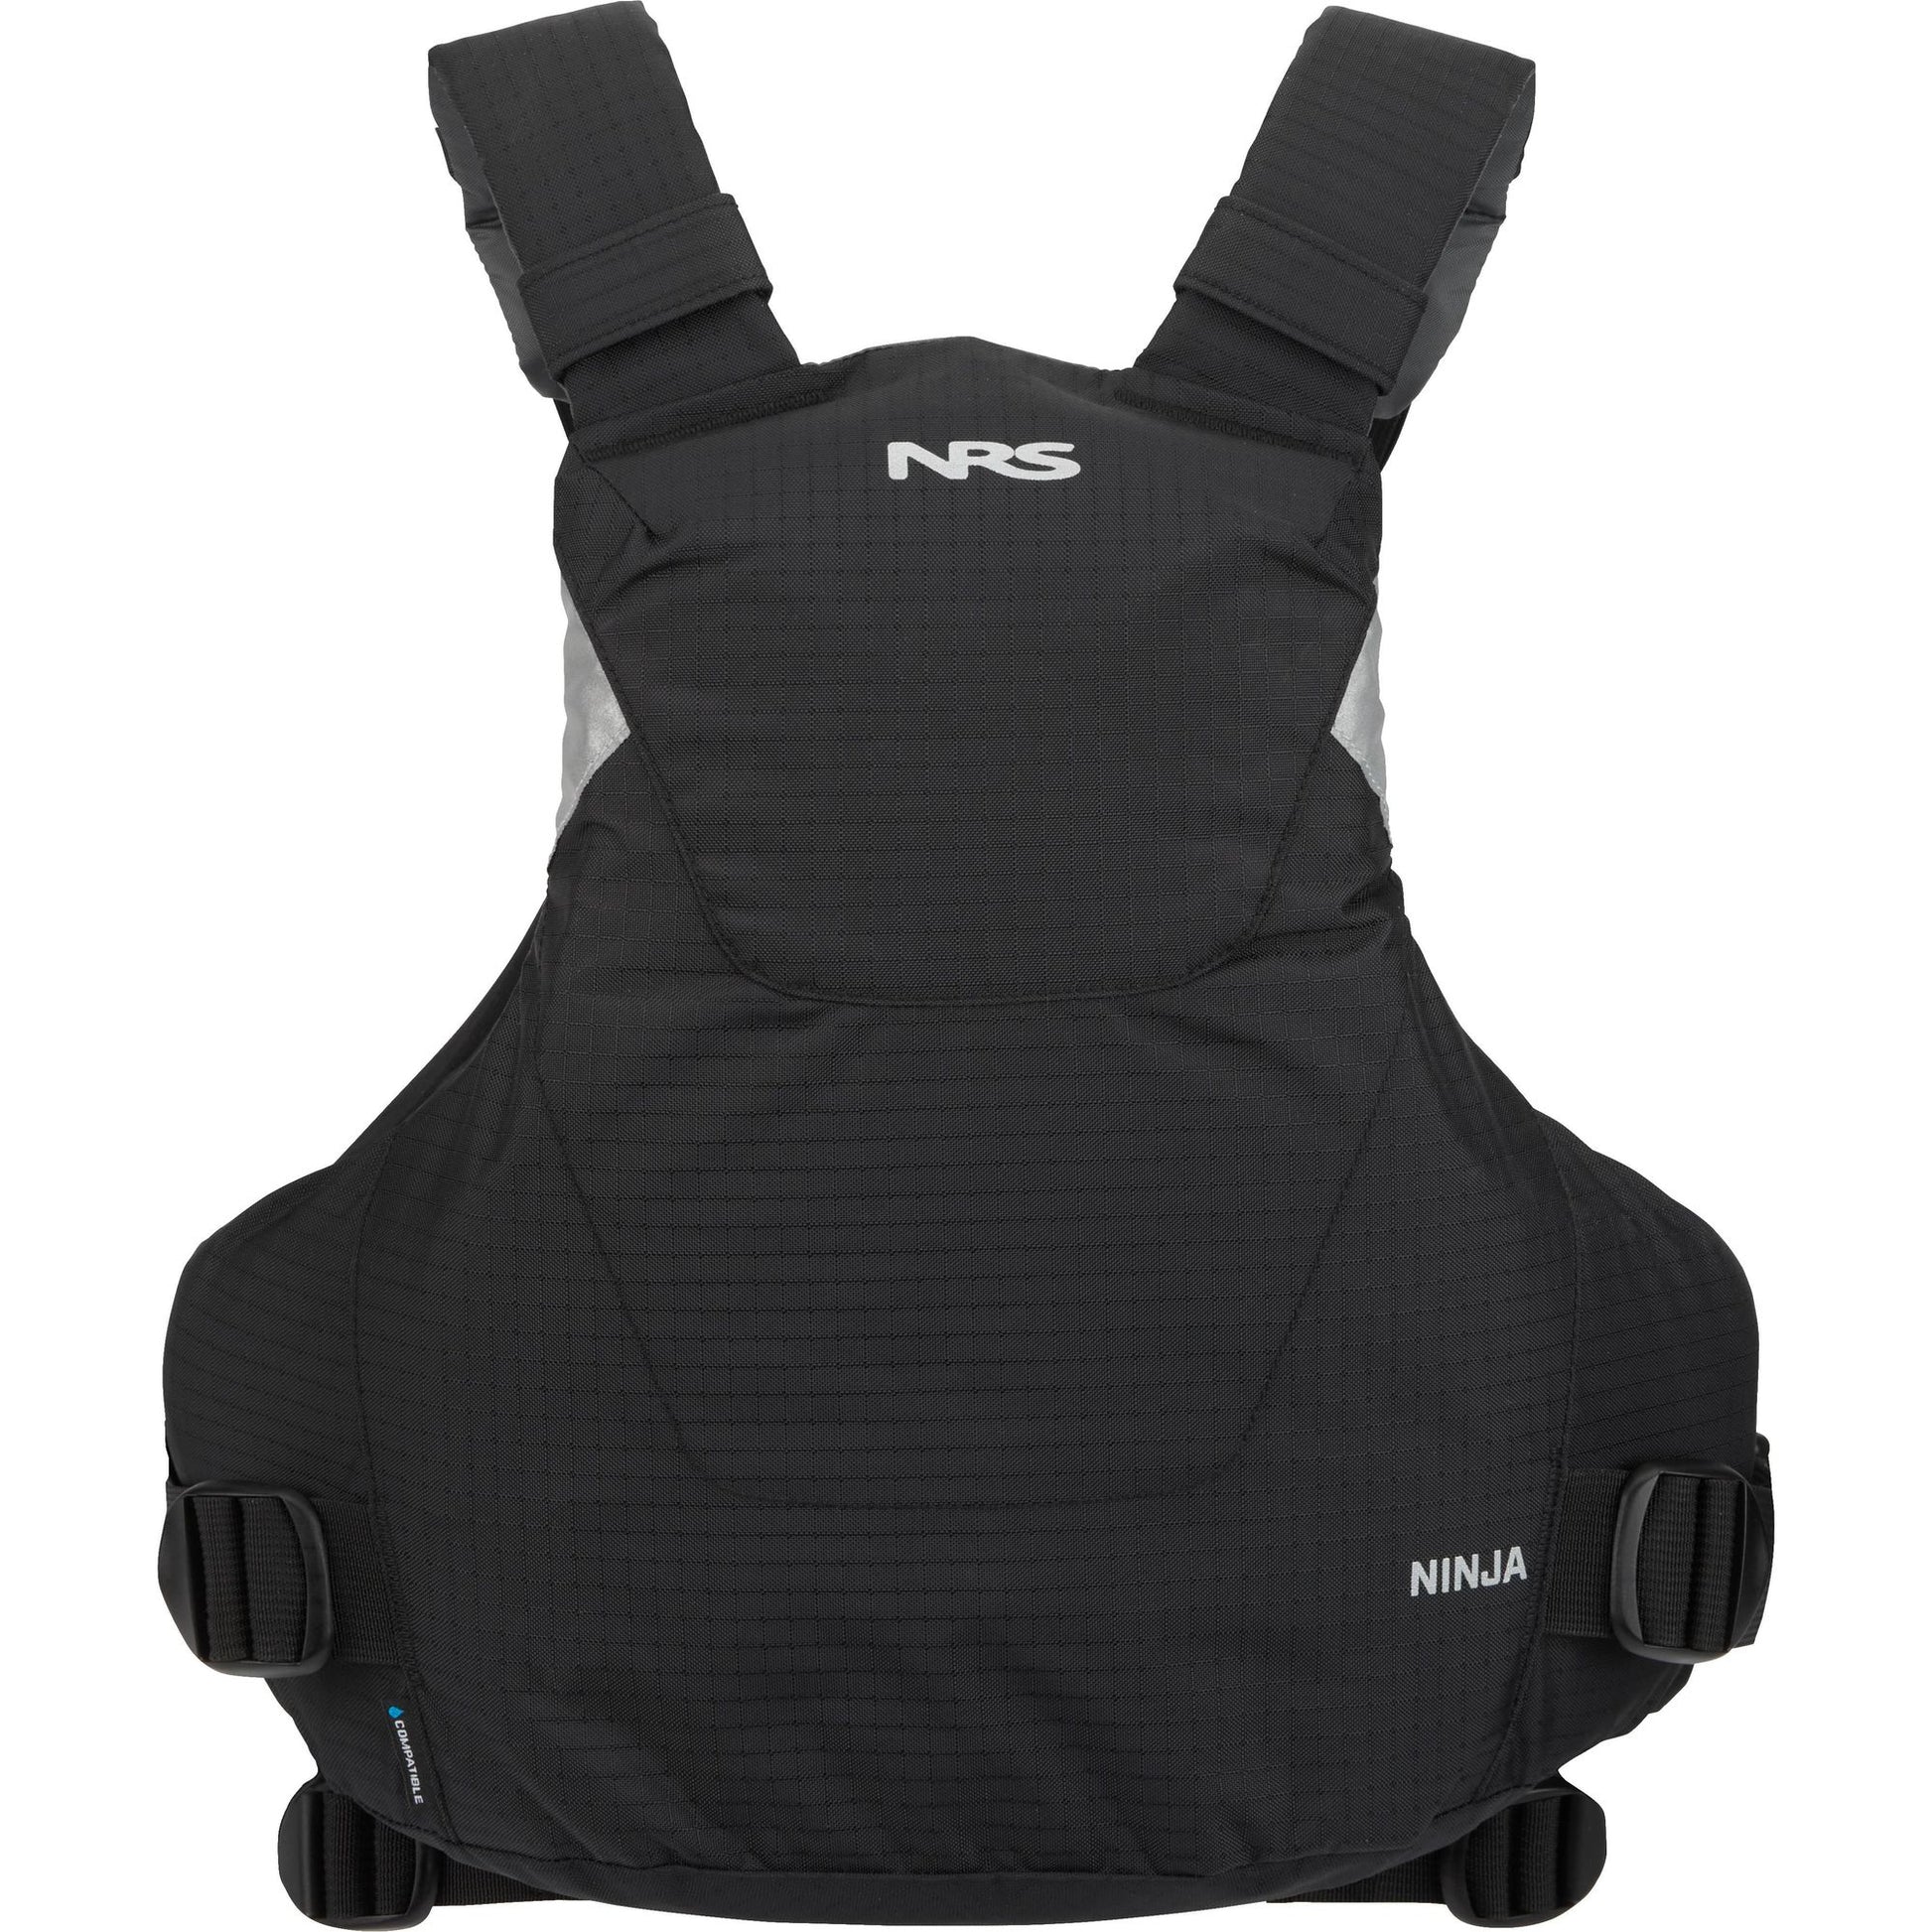 The NRS Ninja PFD is shown on a white background.